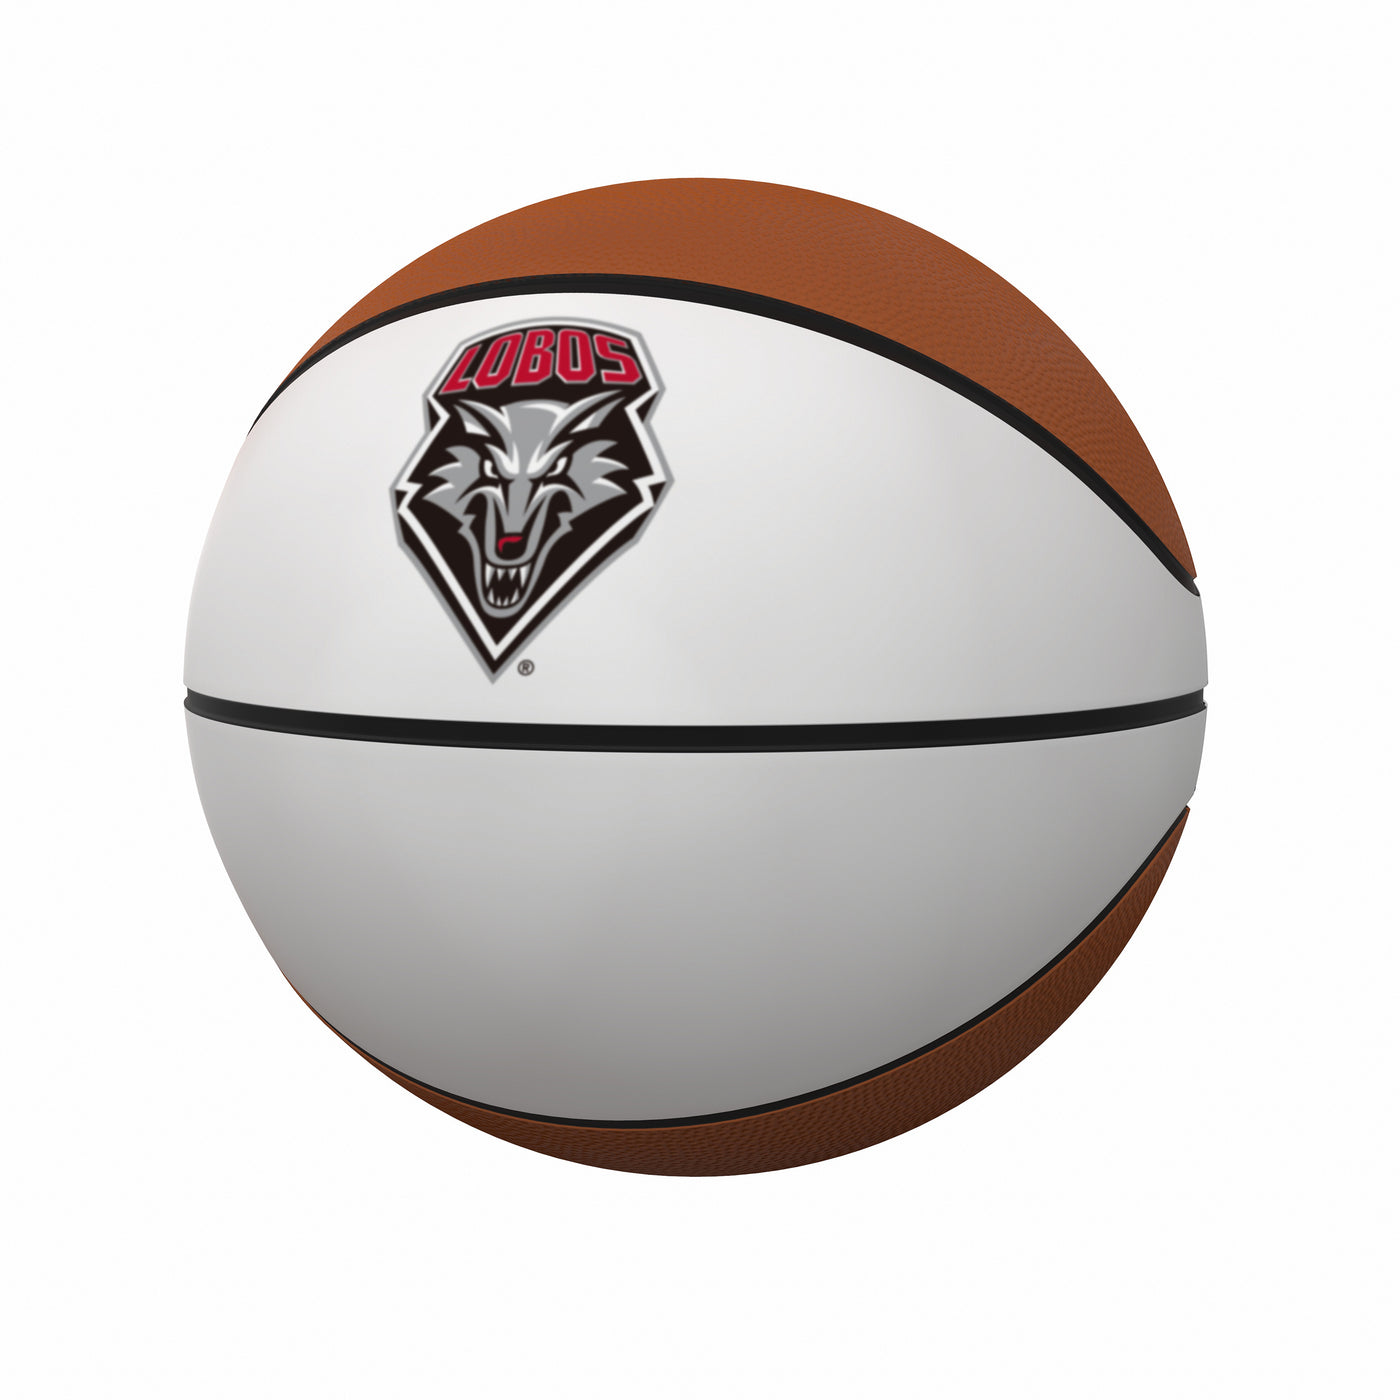 New Mexico Full Size Autograph Basketball